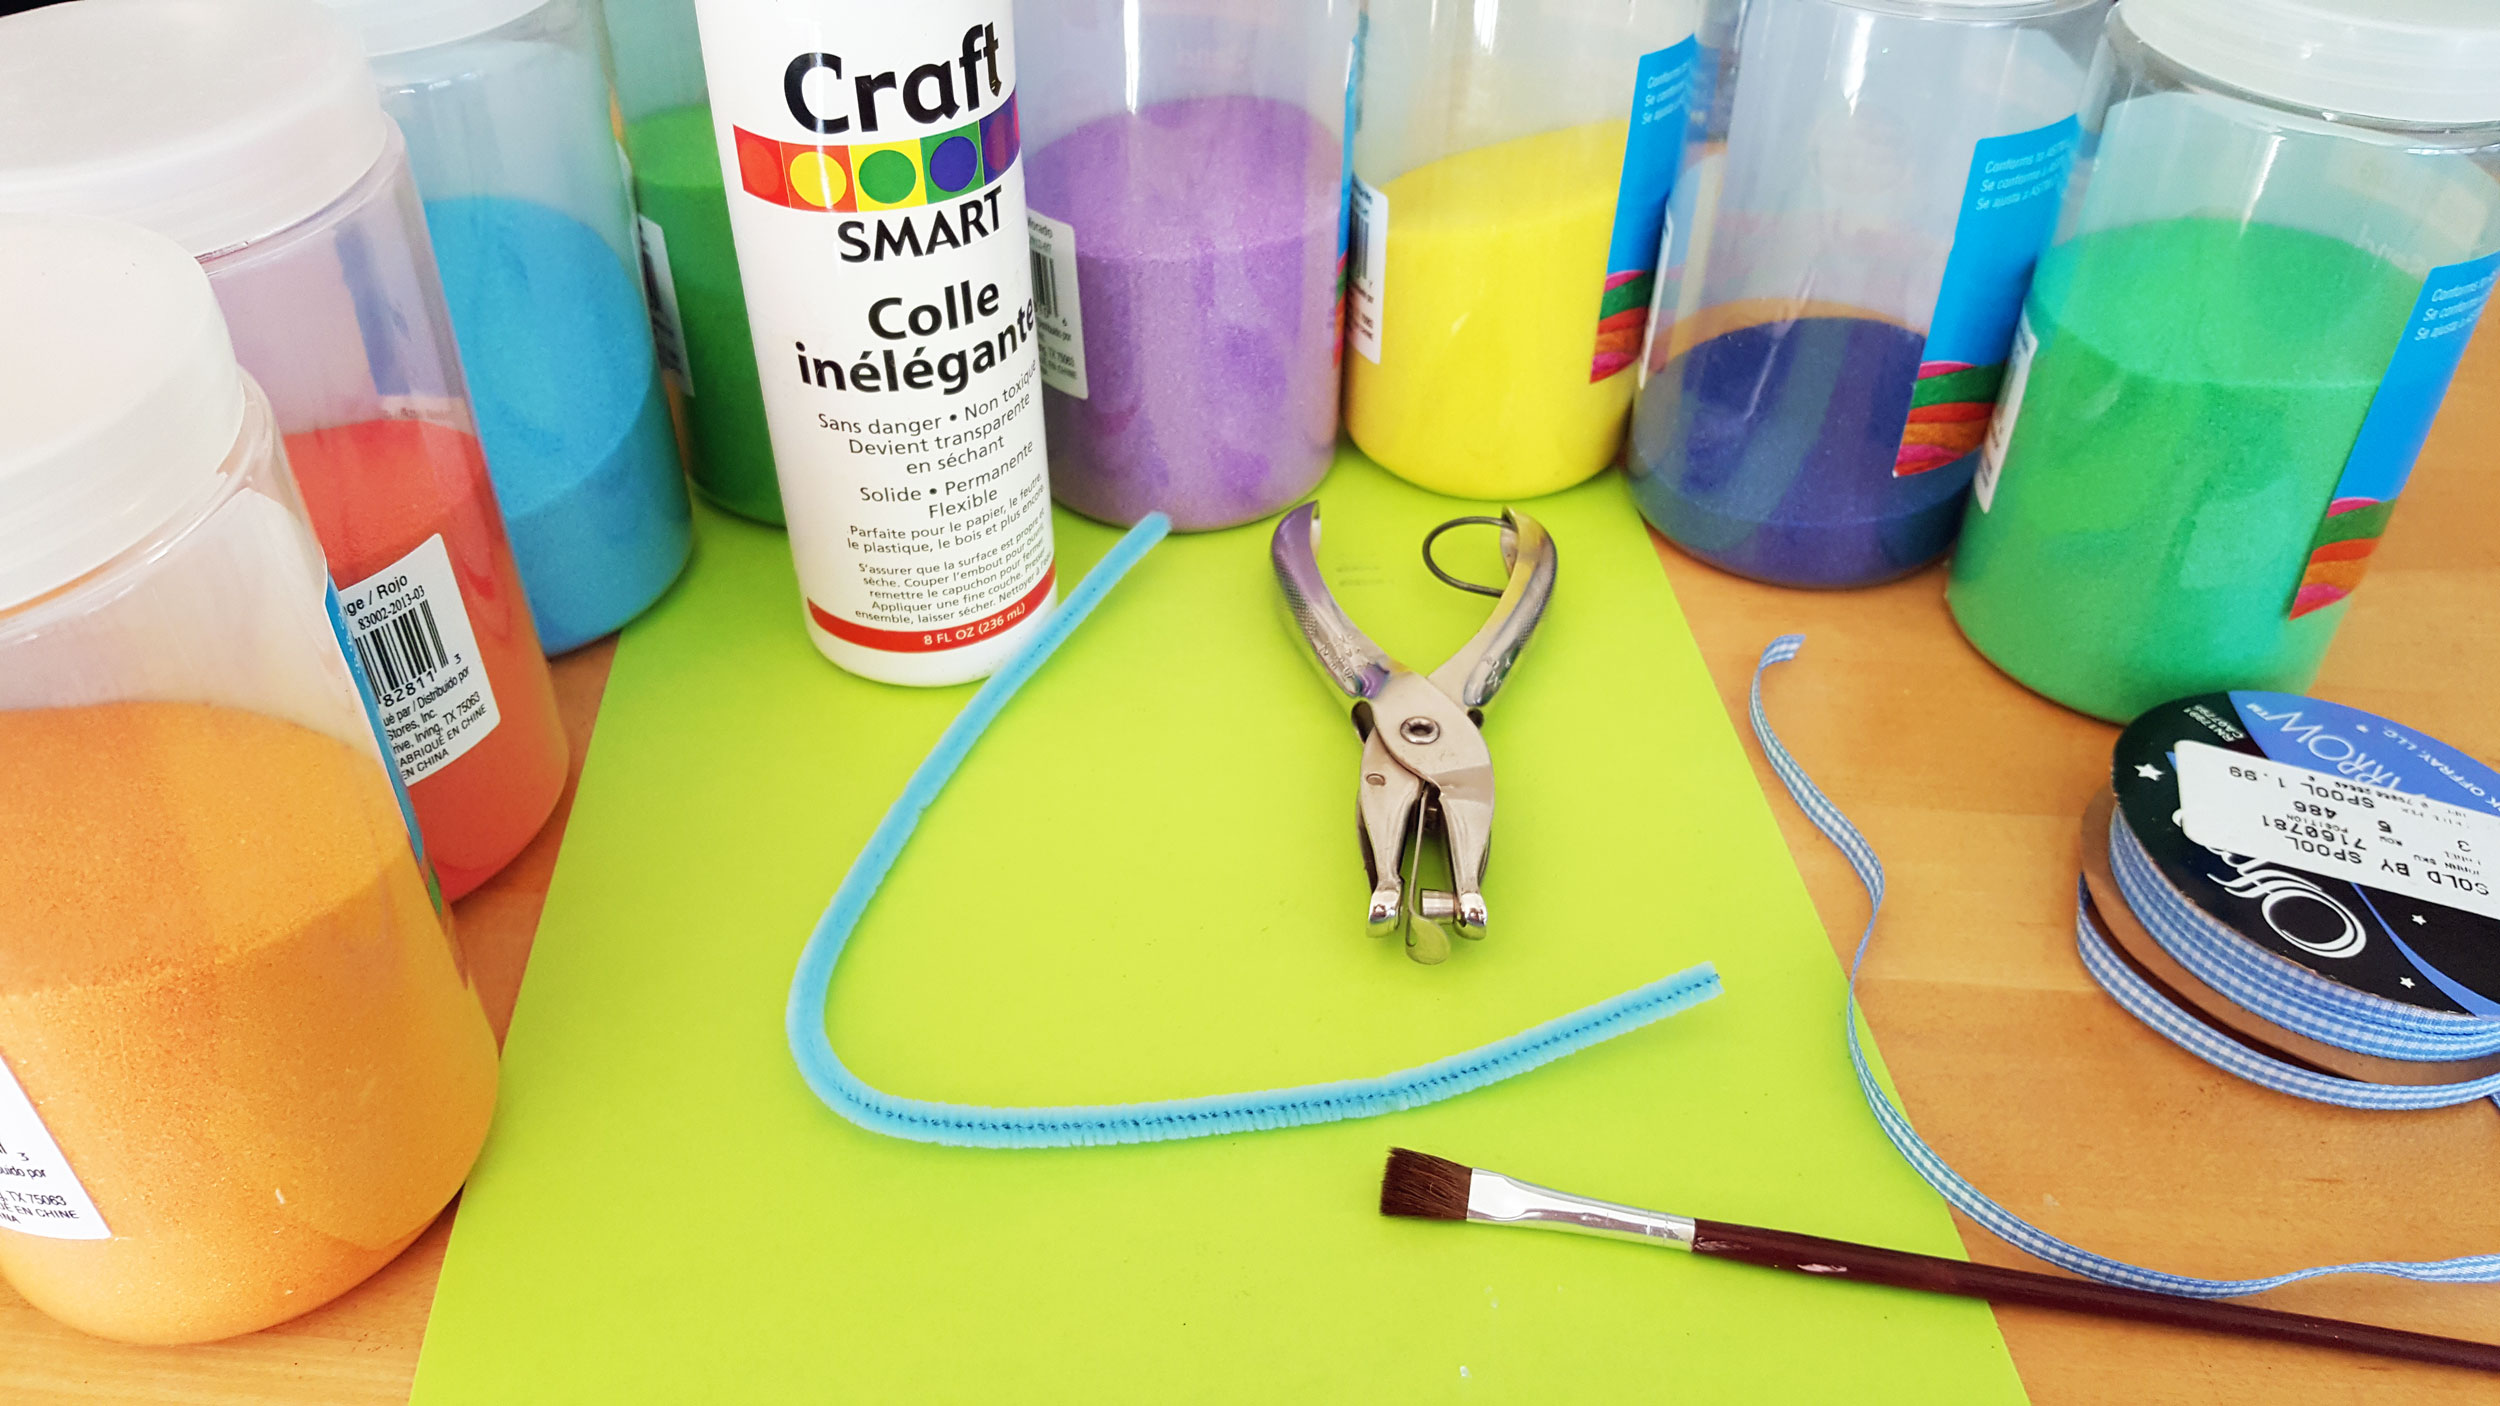 Sand art supplies needed for your DIY ornament: Cardstock paper, scissors, colored sand, glue, paintbrush, hole puncher, pipe cleaners, and ribbon | OrnamentShop.com